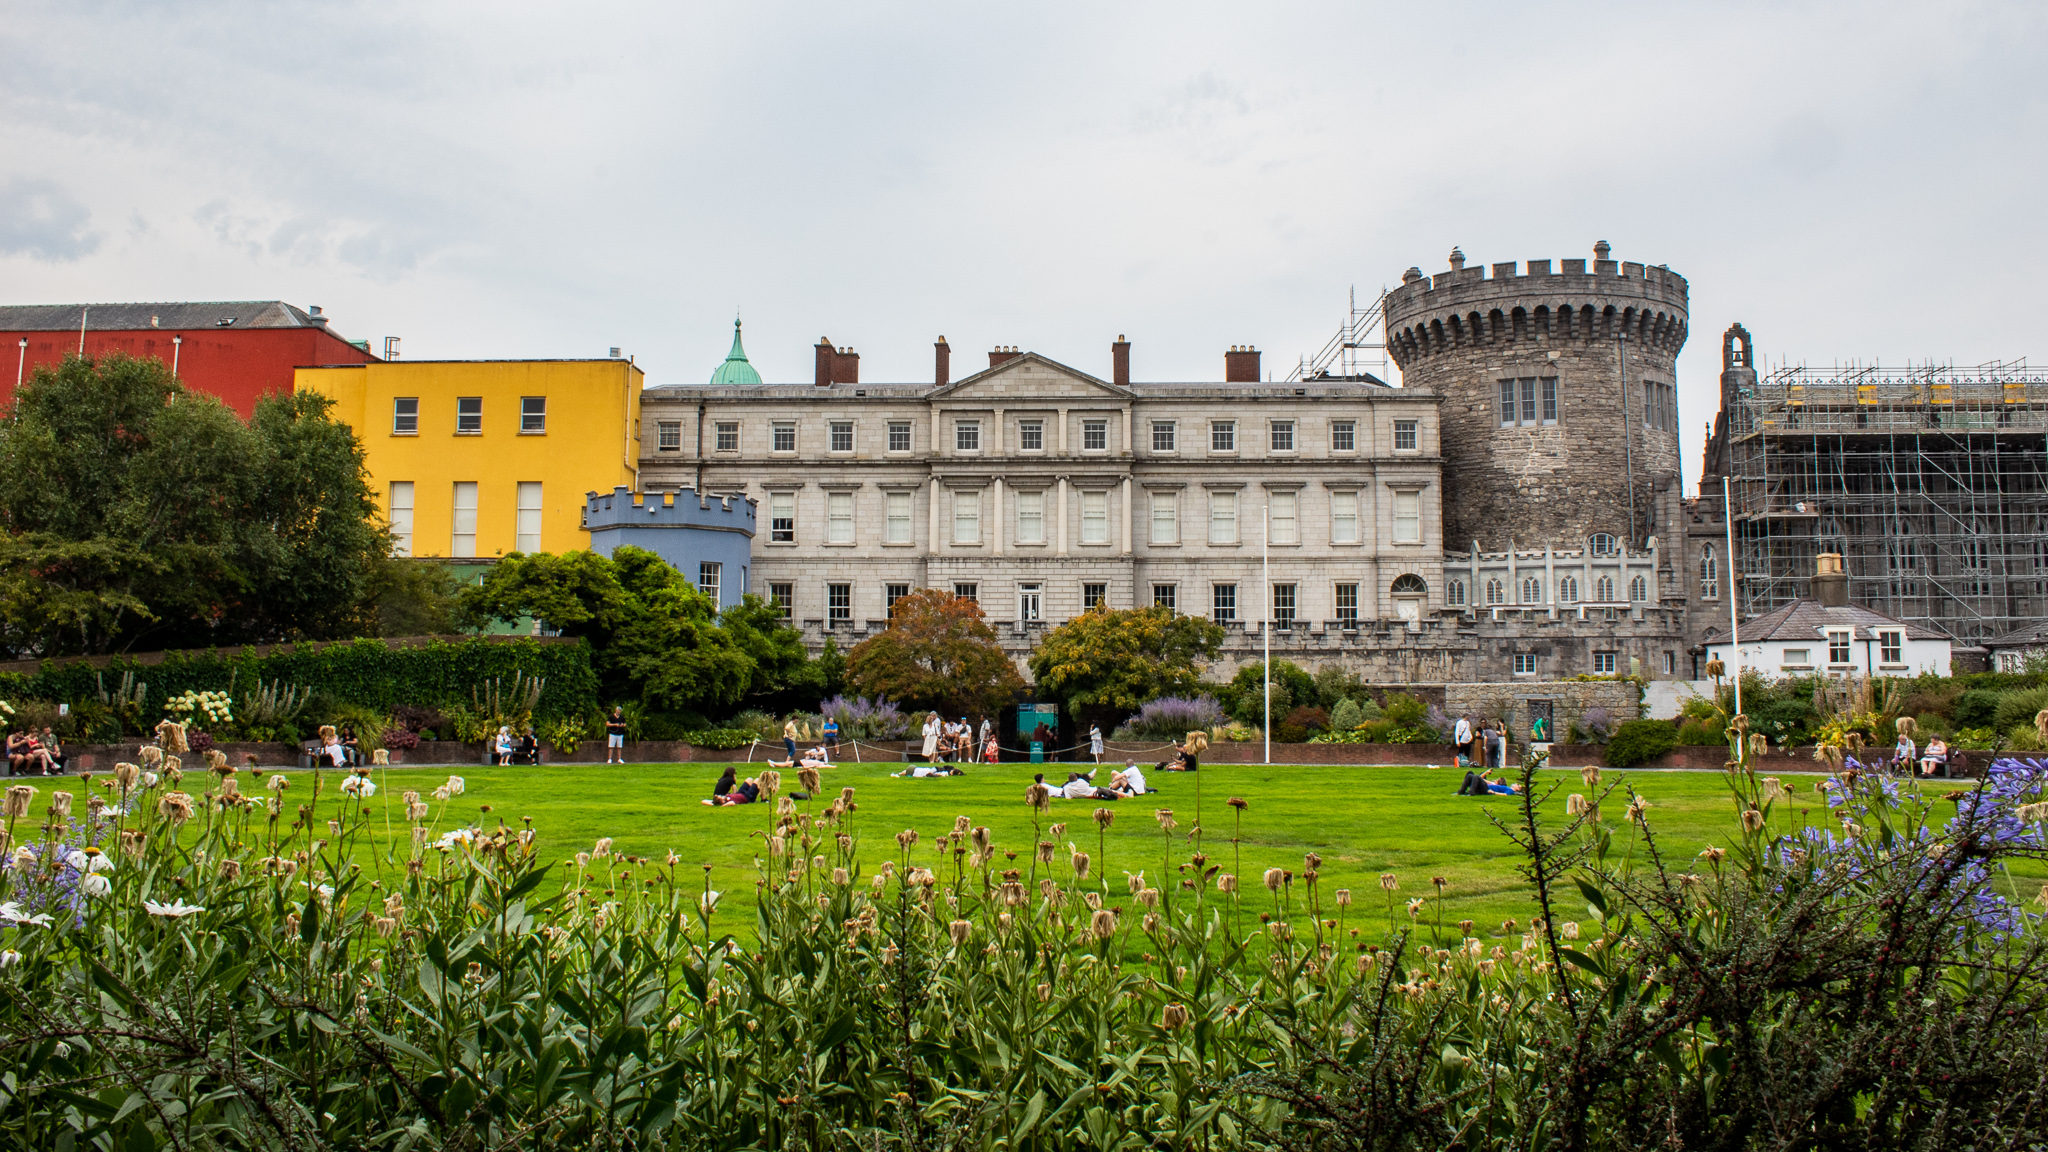 Discover Dublins Top 10 Activities for the Perfect First Visit